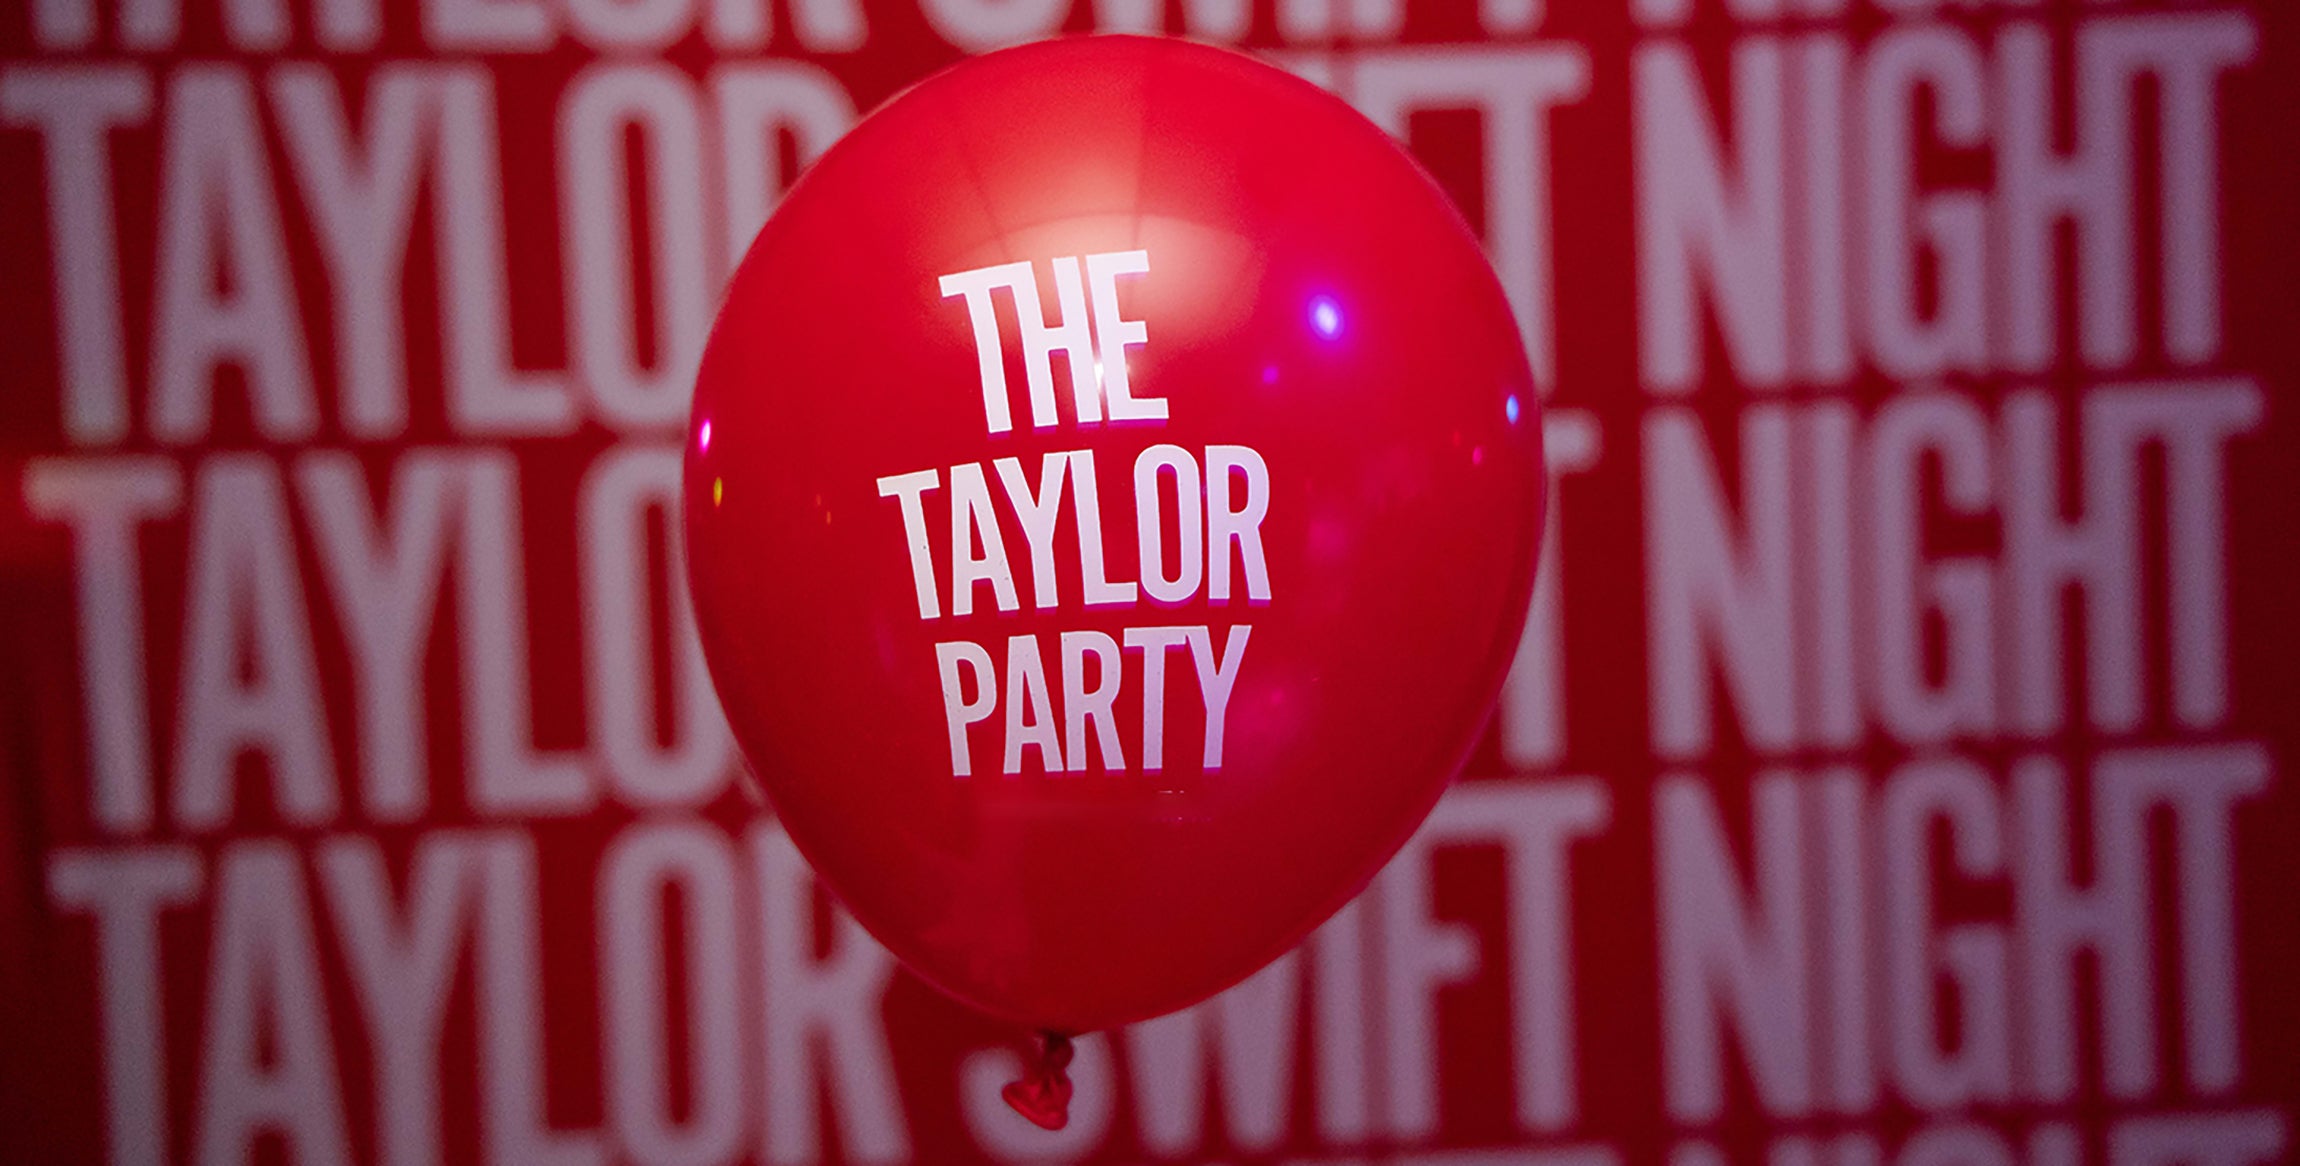 The Taylor Party: Taylor Swift Night - 18+ free presale listing for concert tickets in Raleigh, NC (The Ritz)